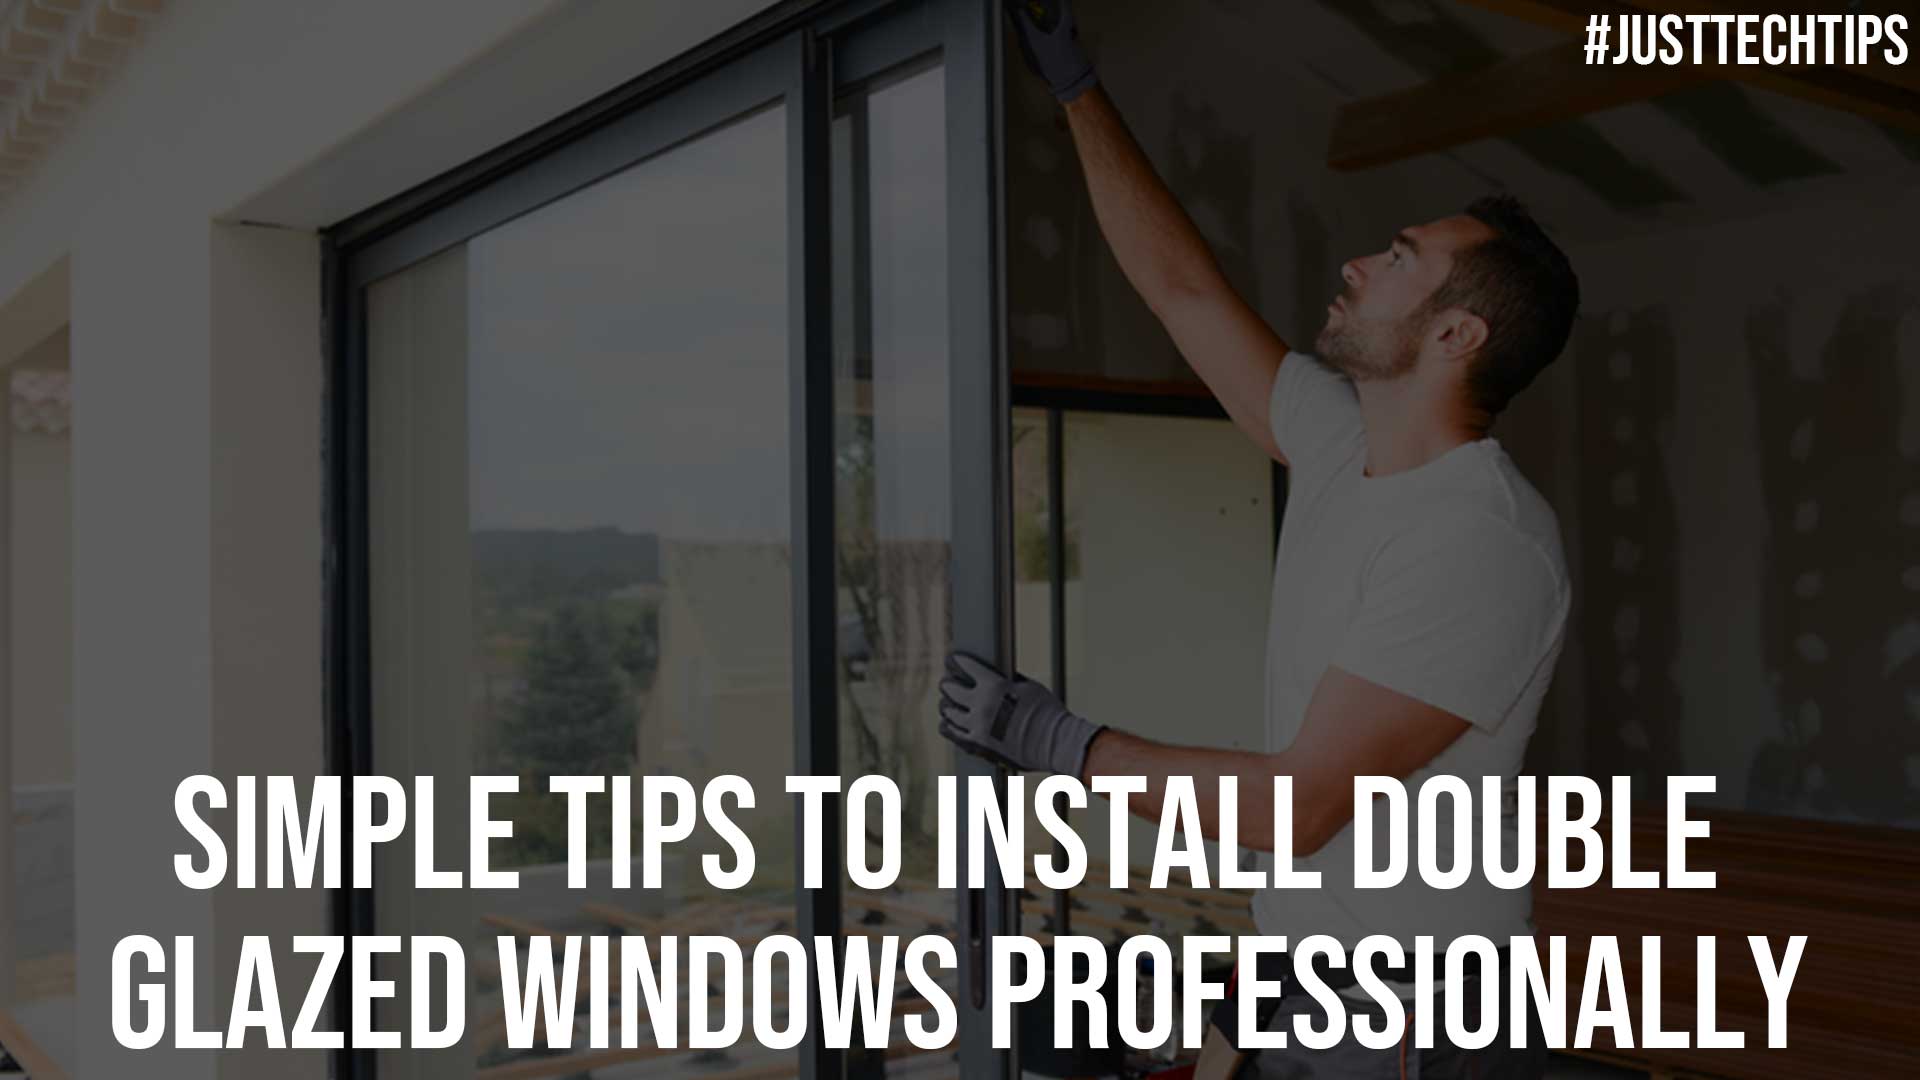 Simple Tips to Install Double Glazed Windows Professionally